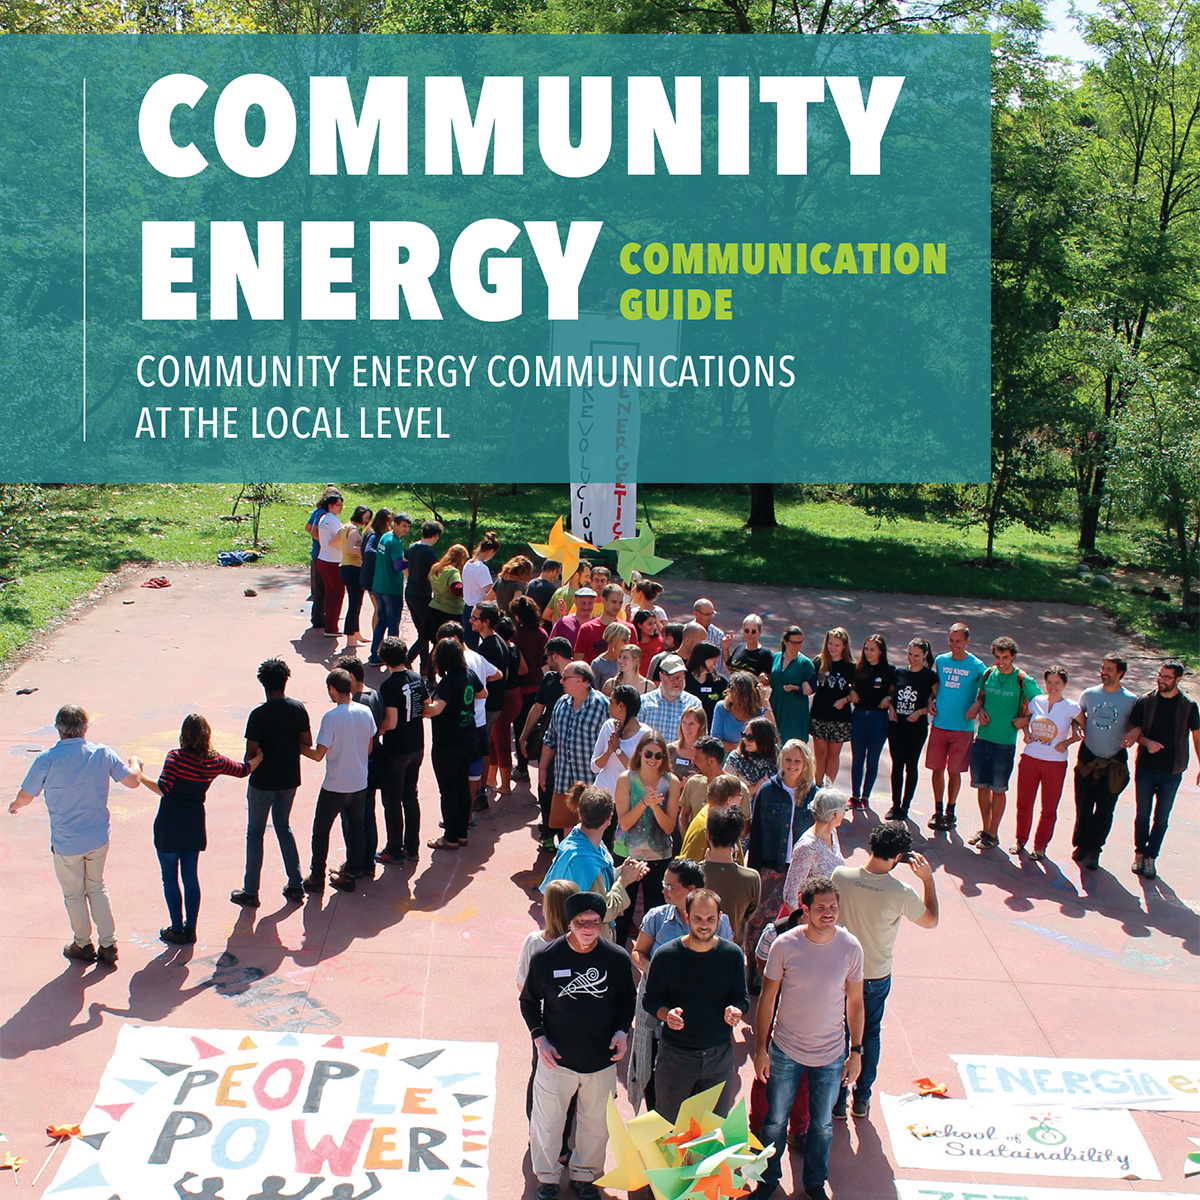 Community energy communication guide cover clean copy